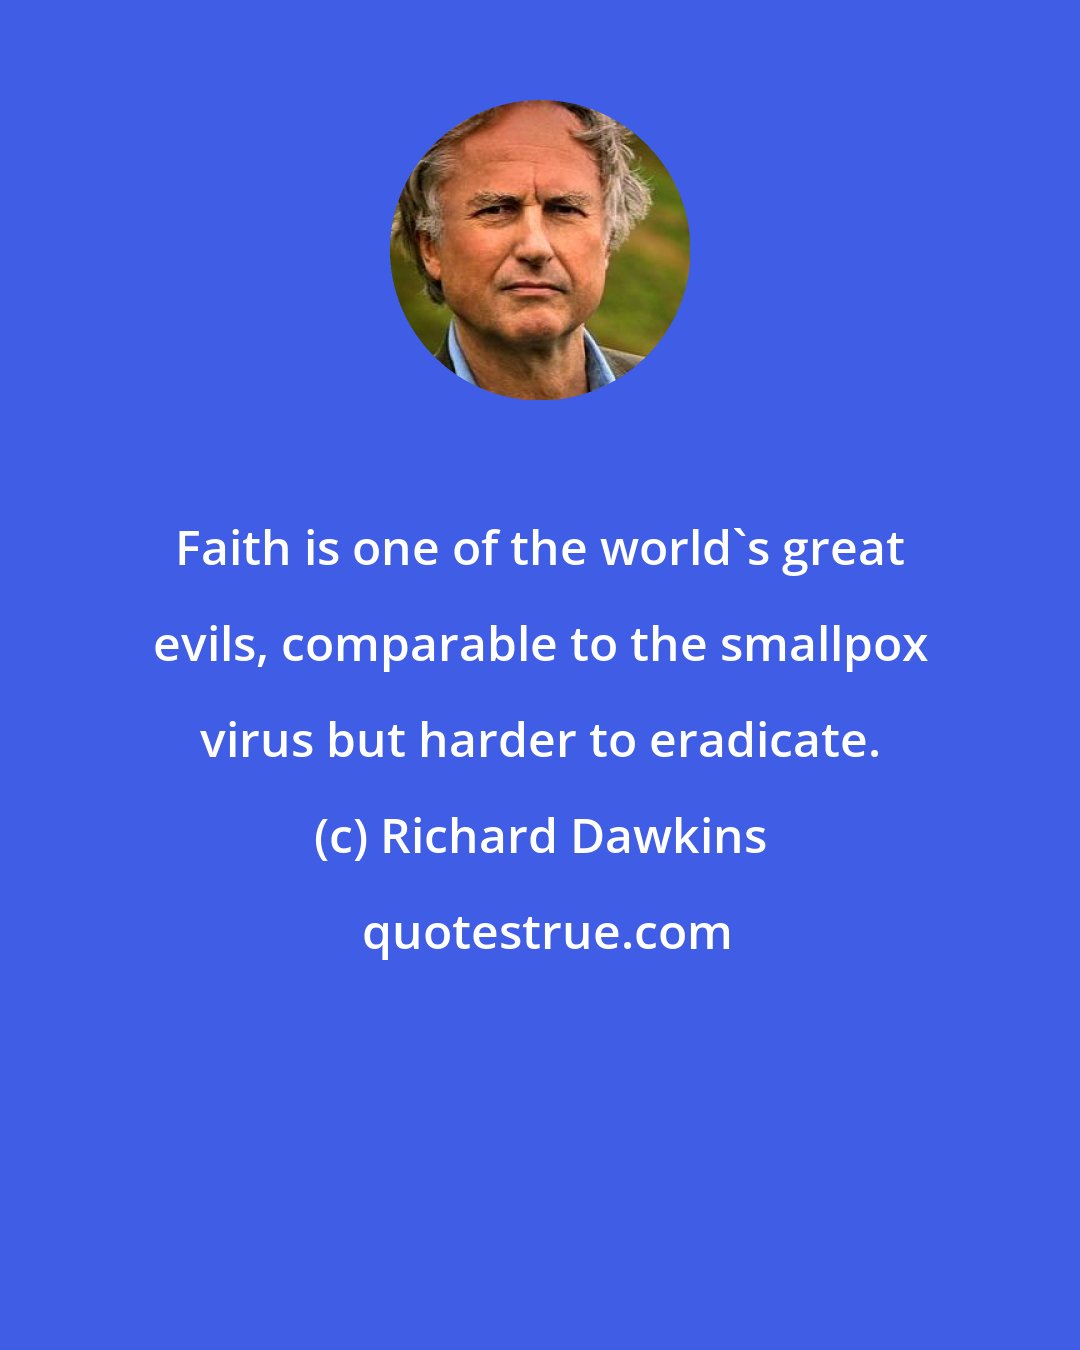 Richard Dawkins: Faith is one of the world's great evils, comparable to the smallpox virus but harder to eradicate.